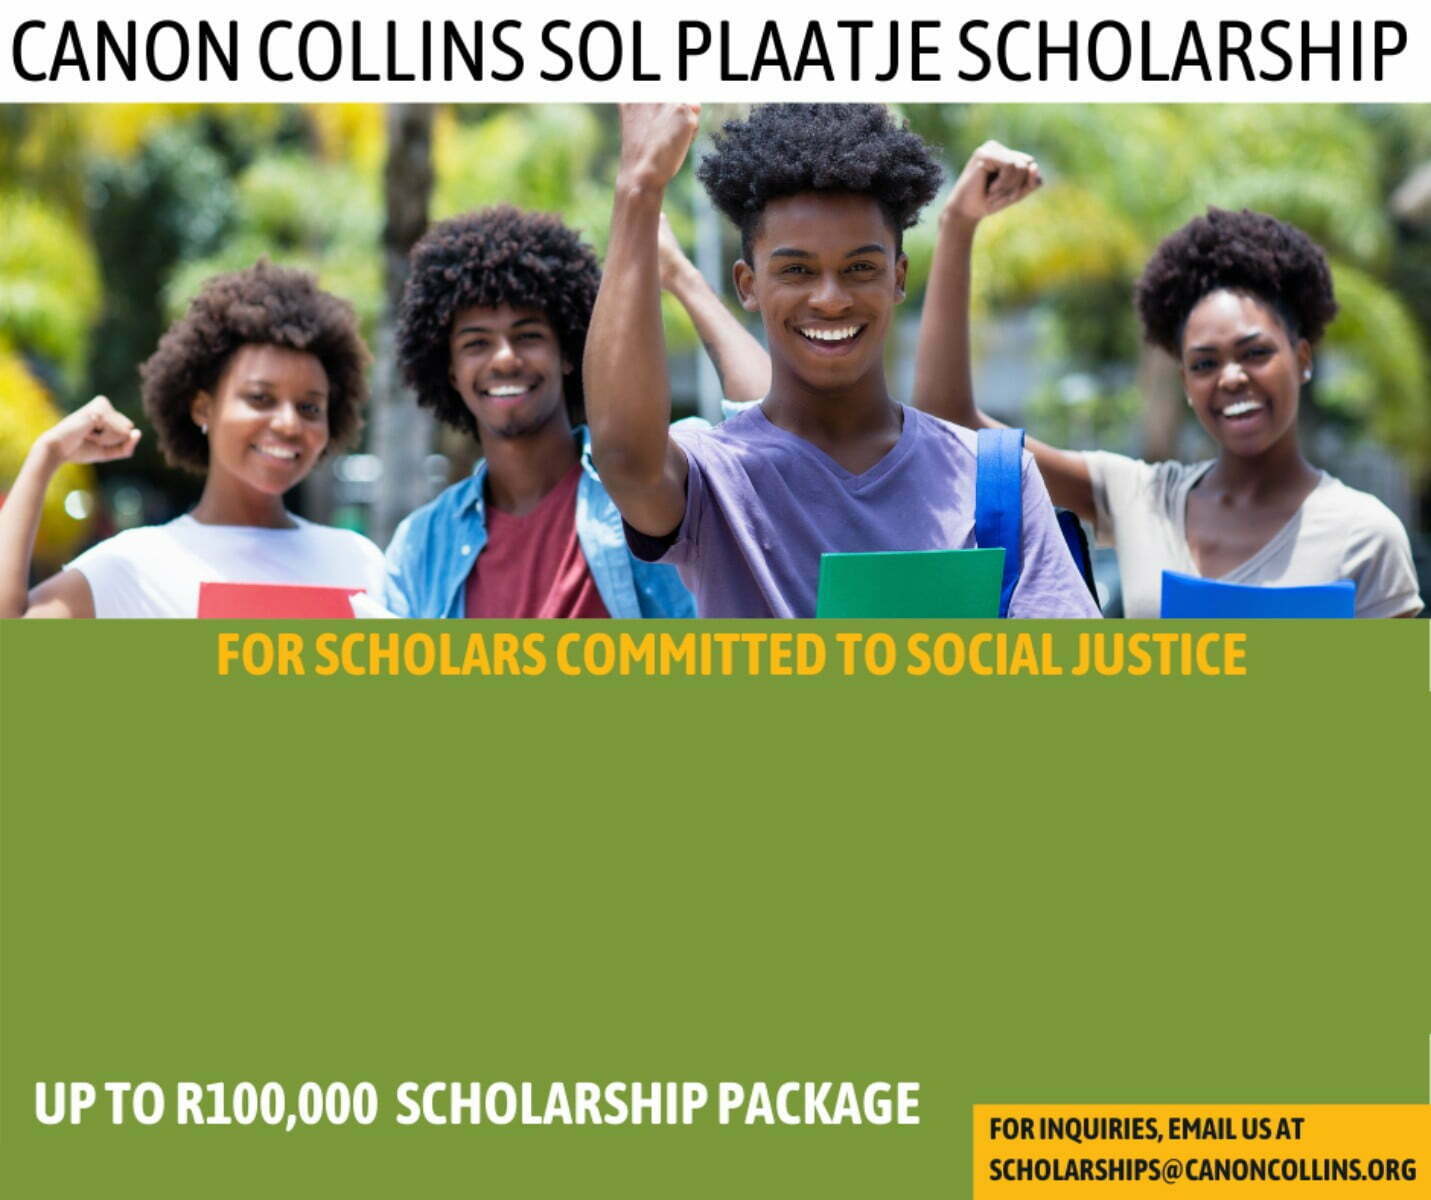 Canon Collins Sol Plaatje Scholarships 2022 at South African University